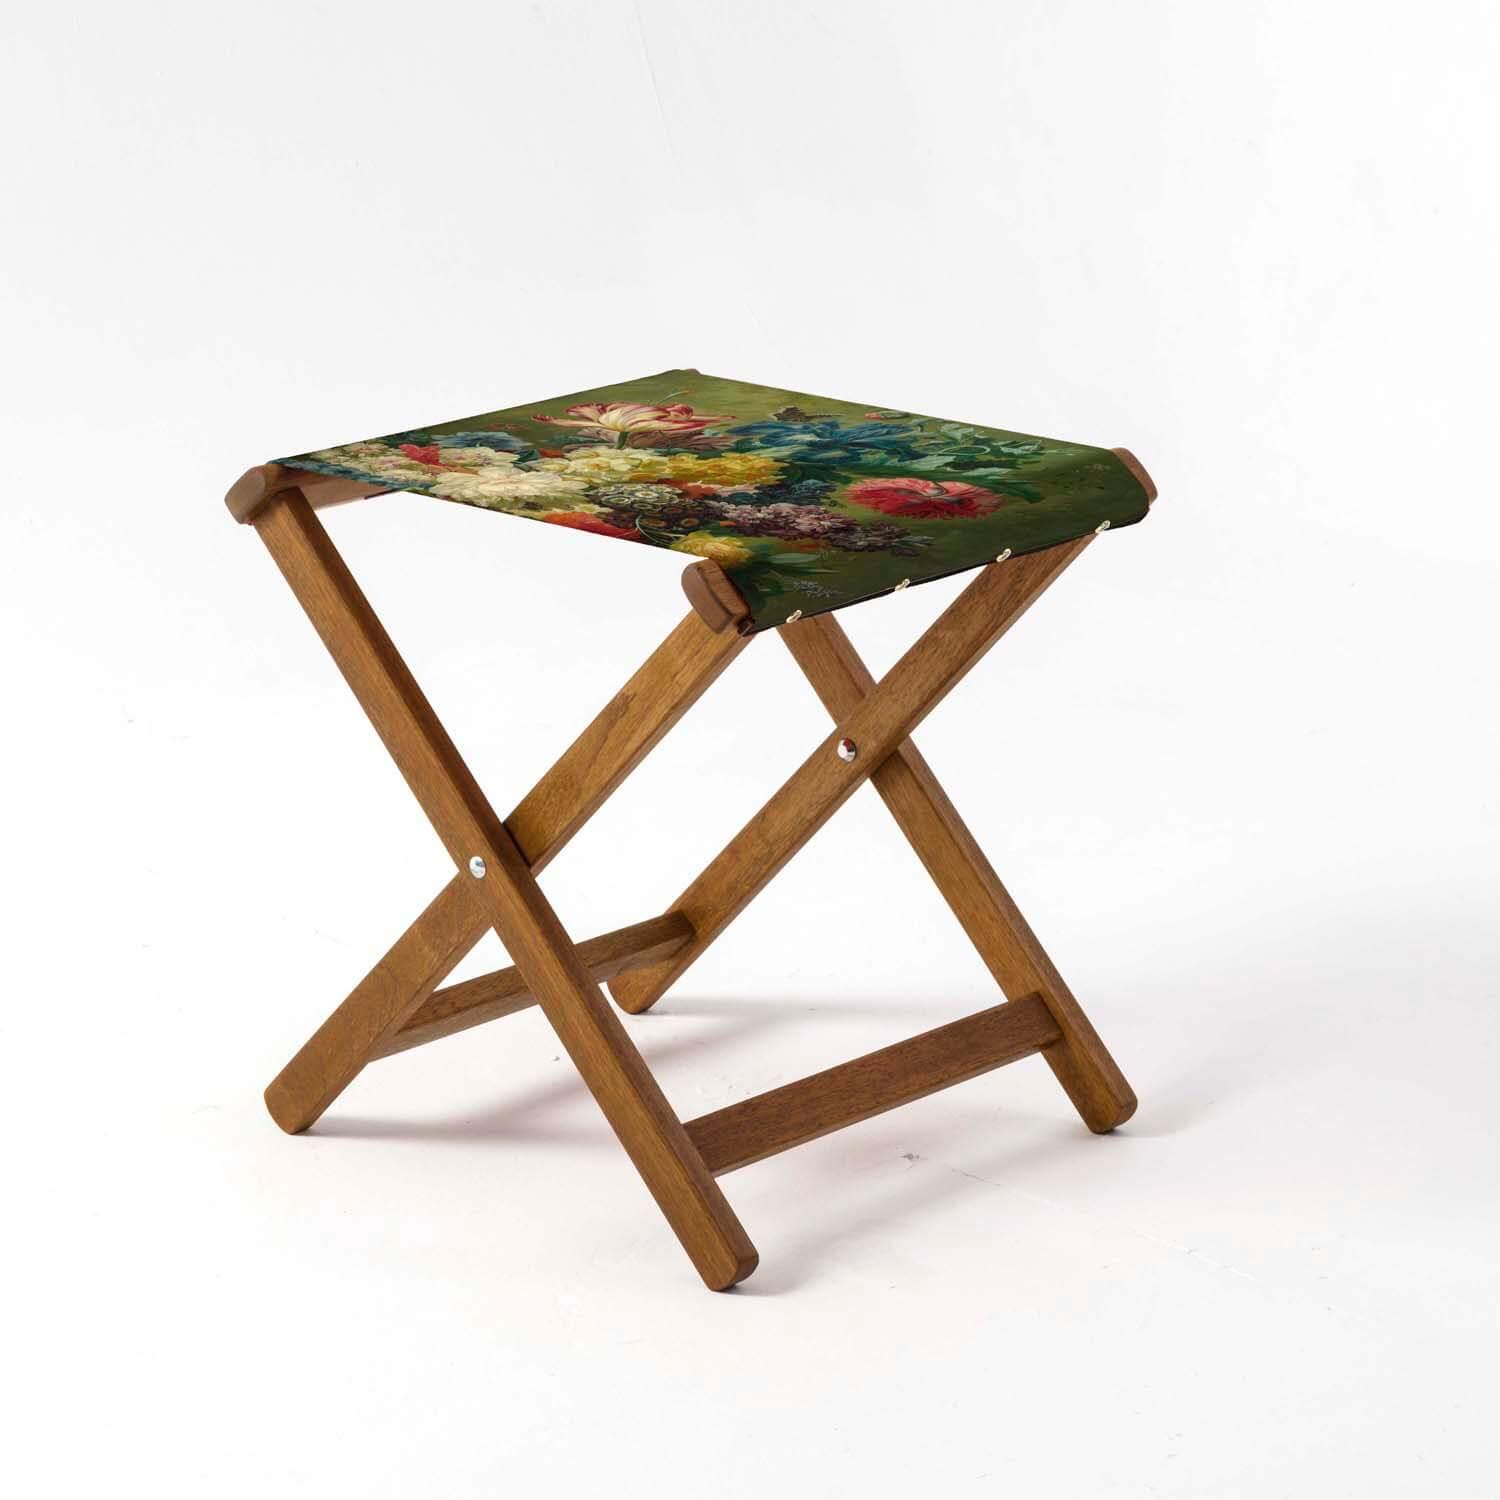 Brussel Flowers Vase - National Gallery - Glamping Camping  Stool